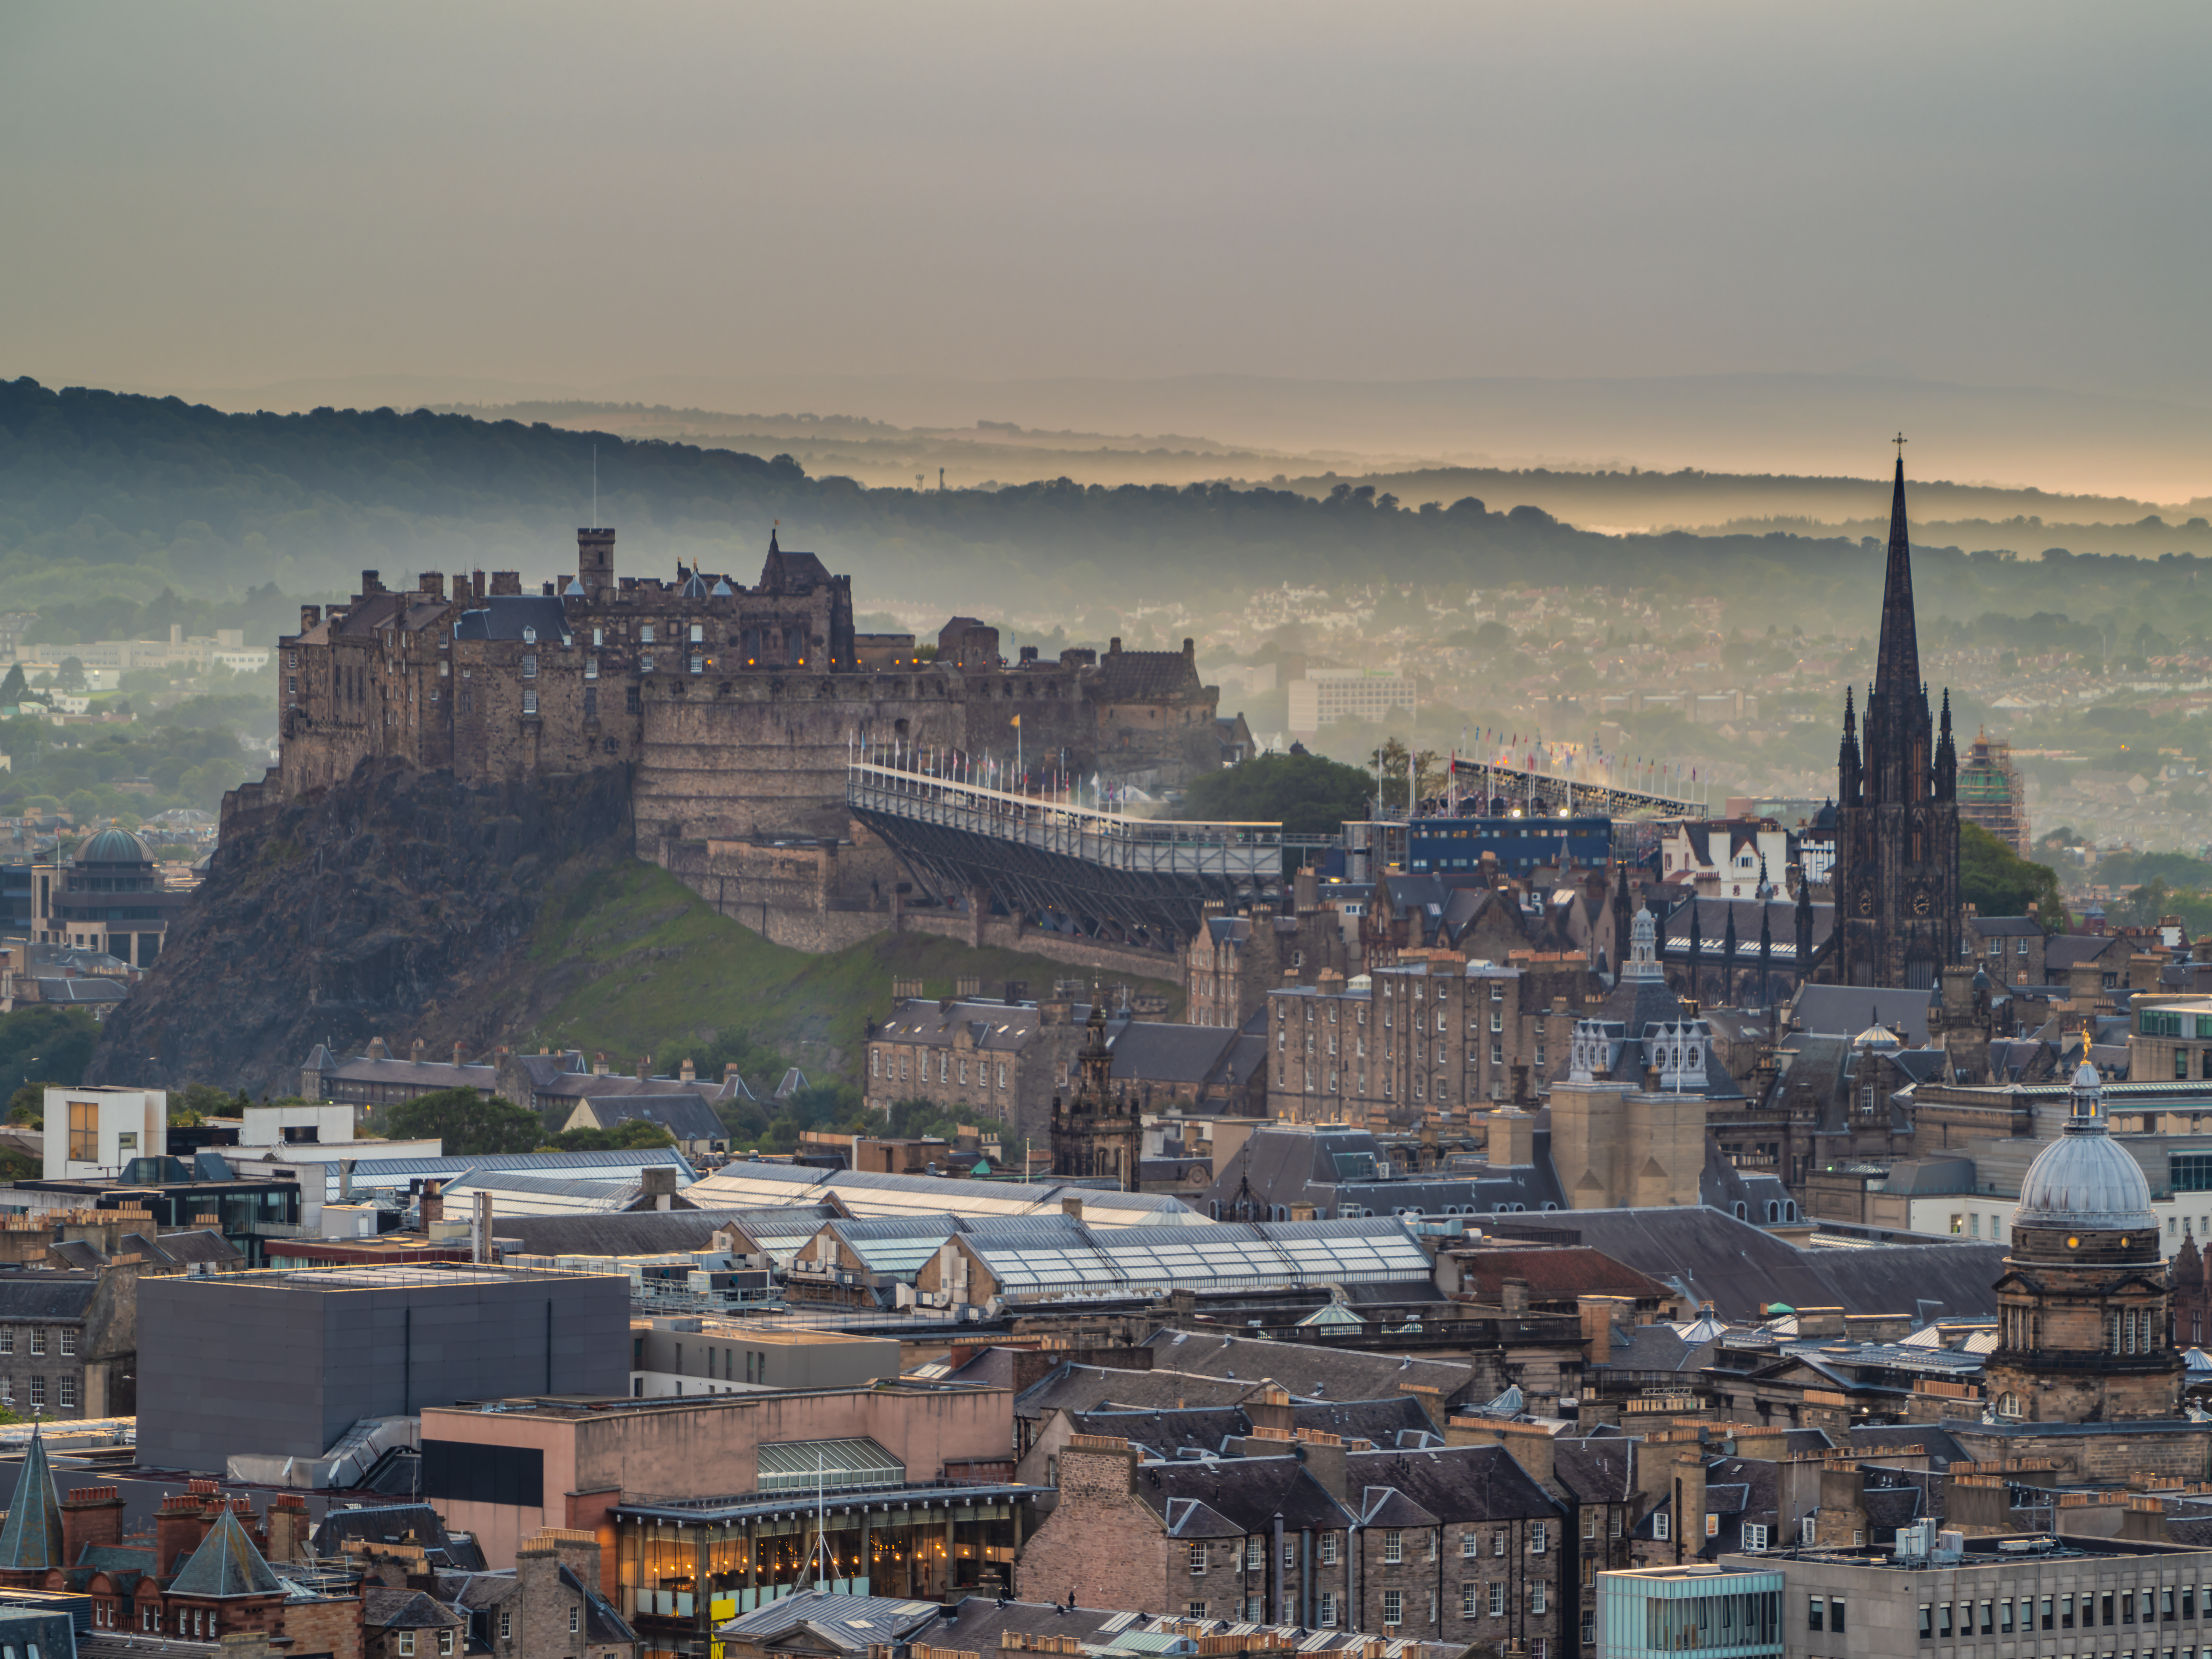 Edinburgh is one of the most searched and pinned cities on Pinterest.